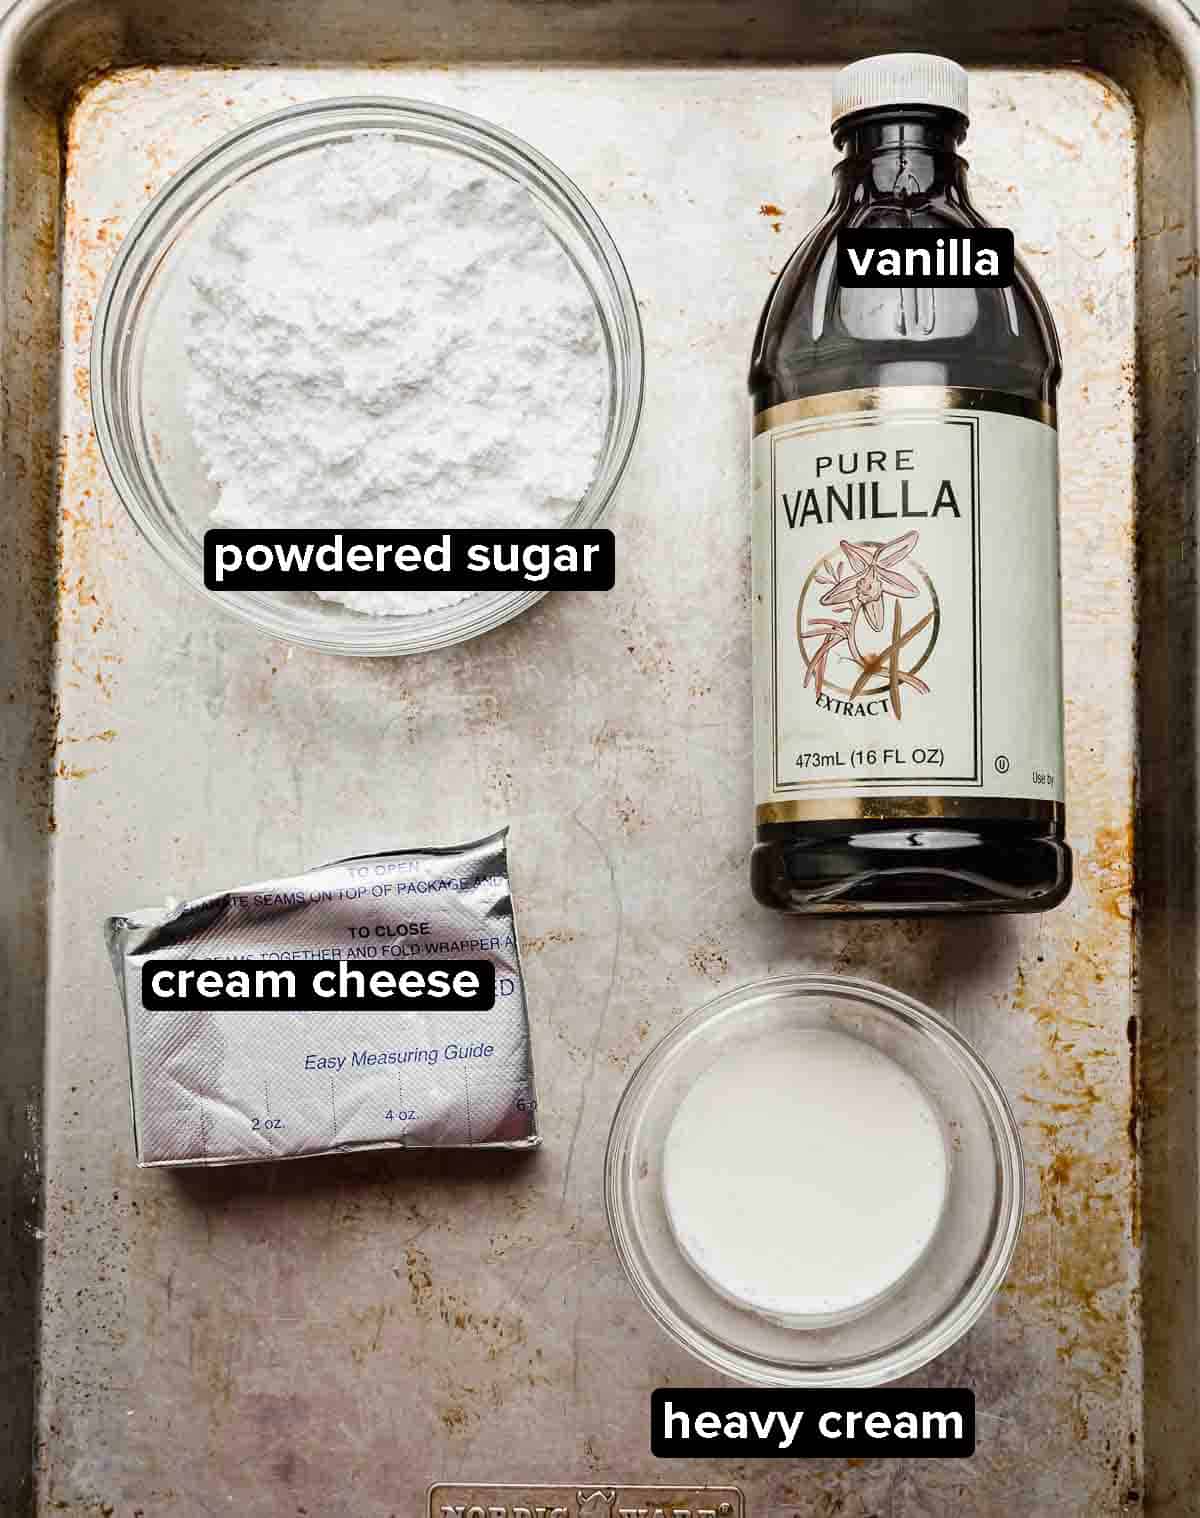 Ingredients used to make a cream cheese filling for the base of an Arkansas possum pie recipe, powdered sugar, cream cheese, heavy cream, and vanilla extract pictured on a baking sheet.